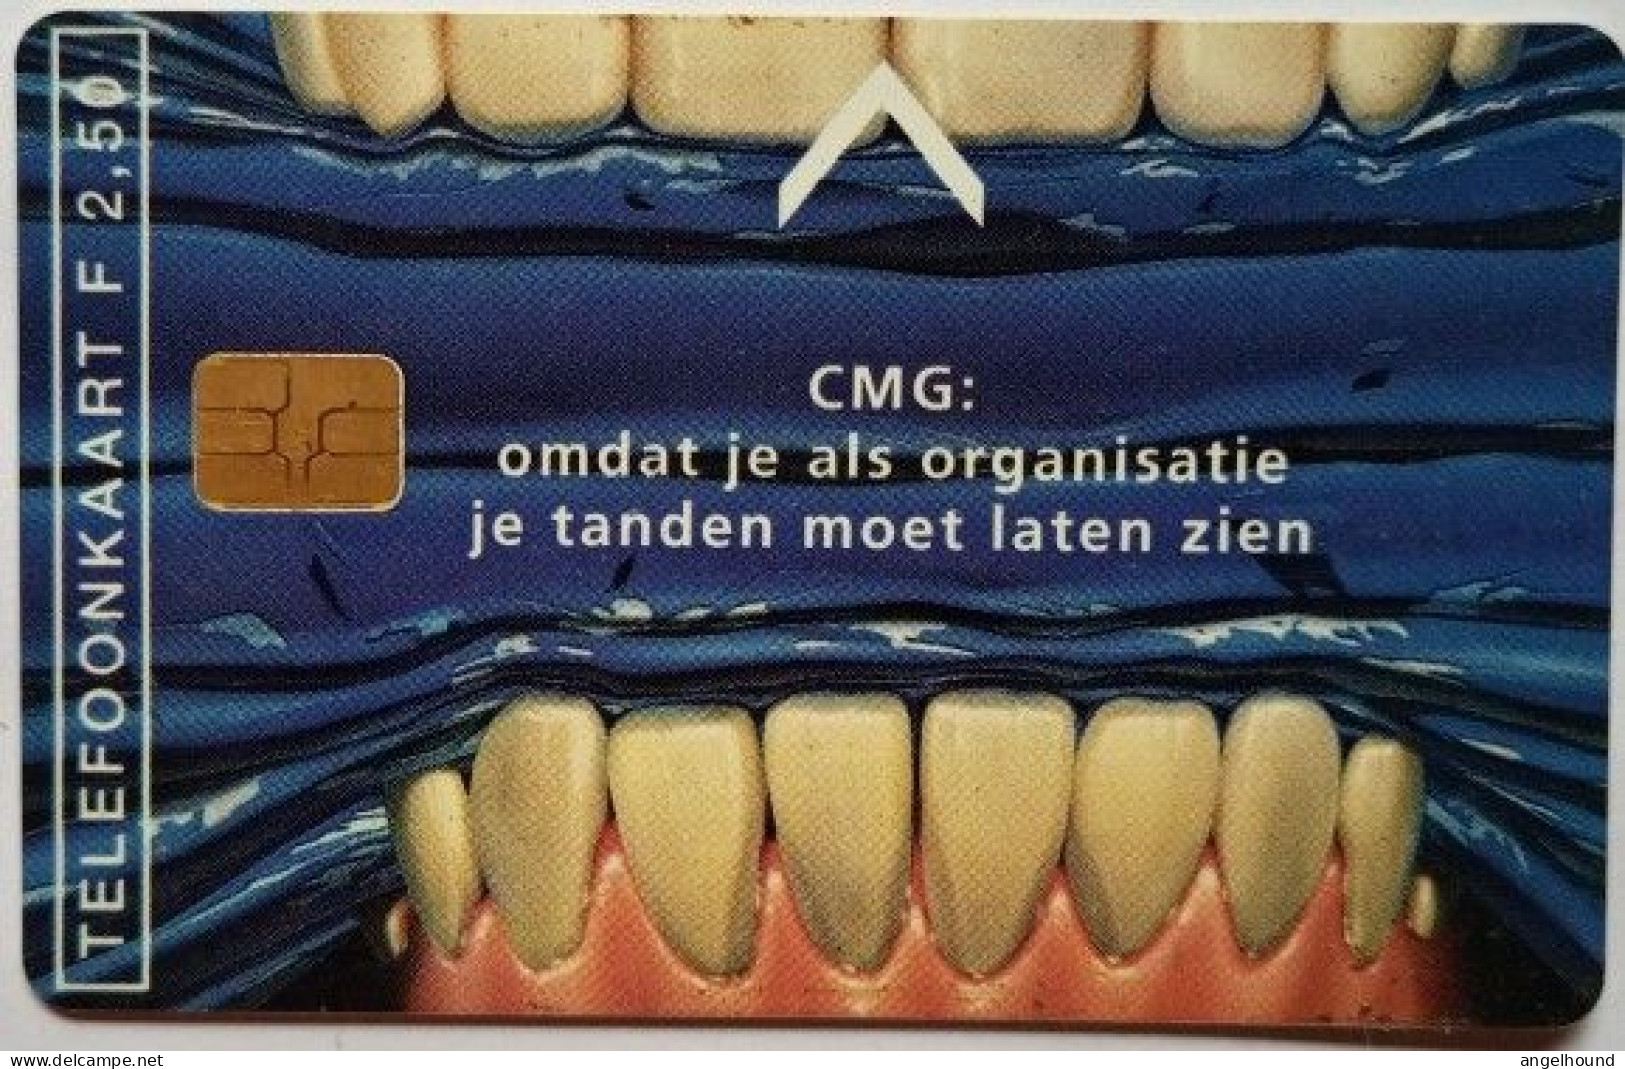 Netherlands F 2.50  MINT  - CMG  ( Computer Management Group ) - Private